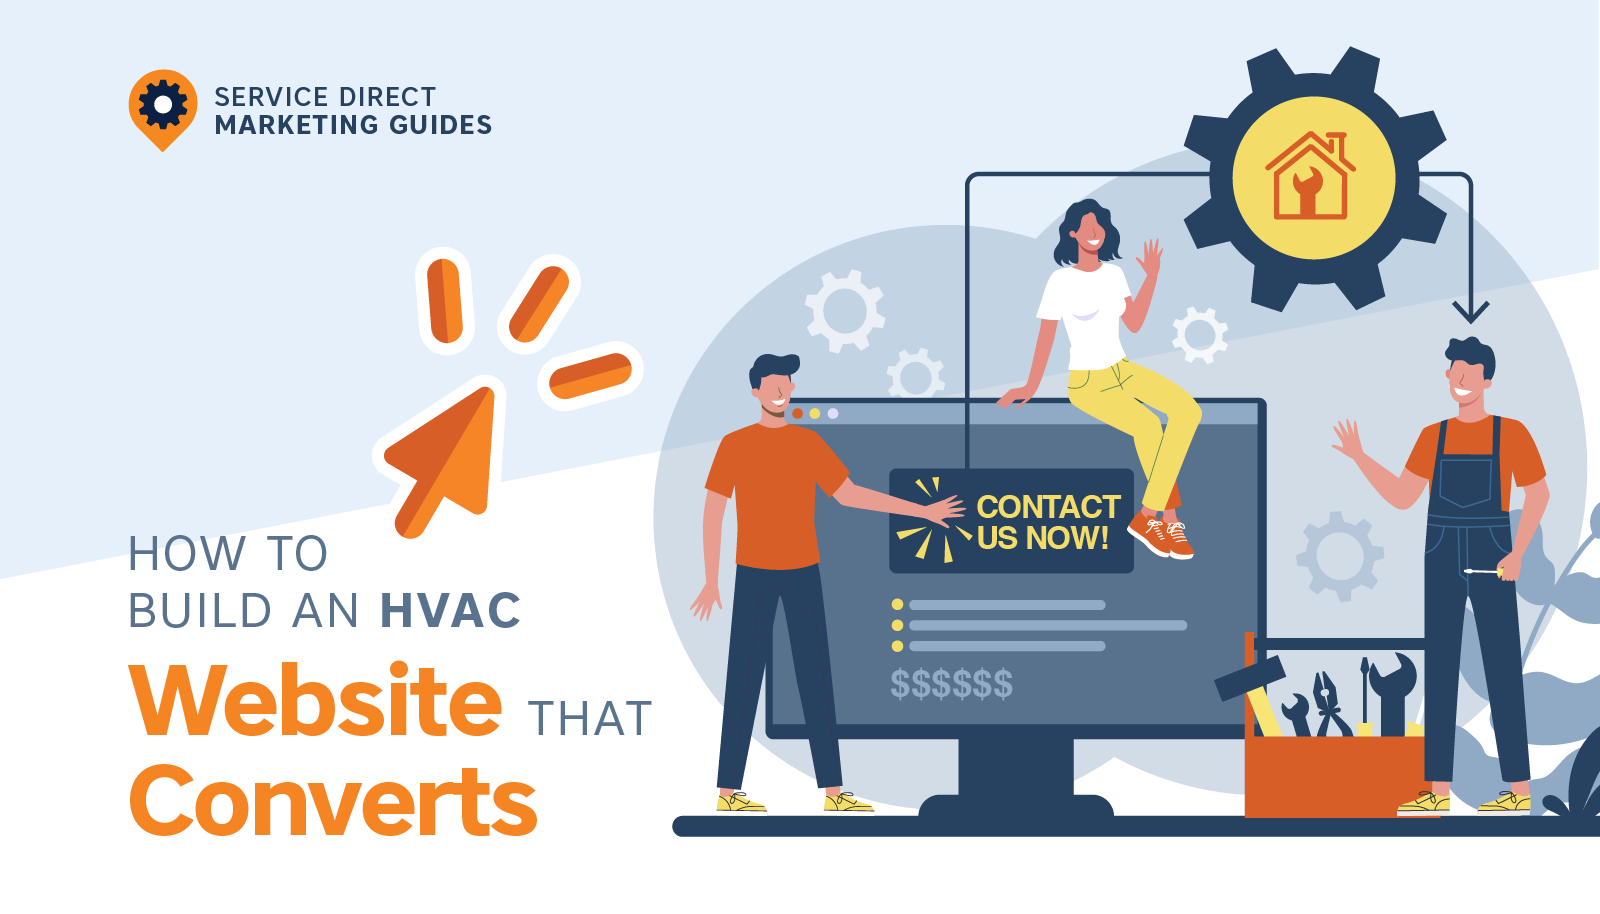 How to Build an HVAC Website that Converts - Service Direct